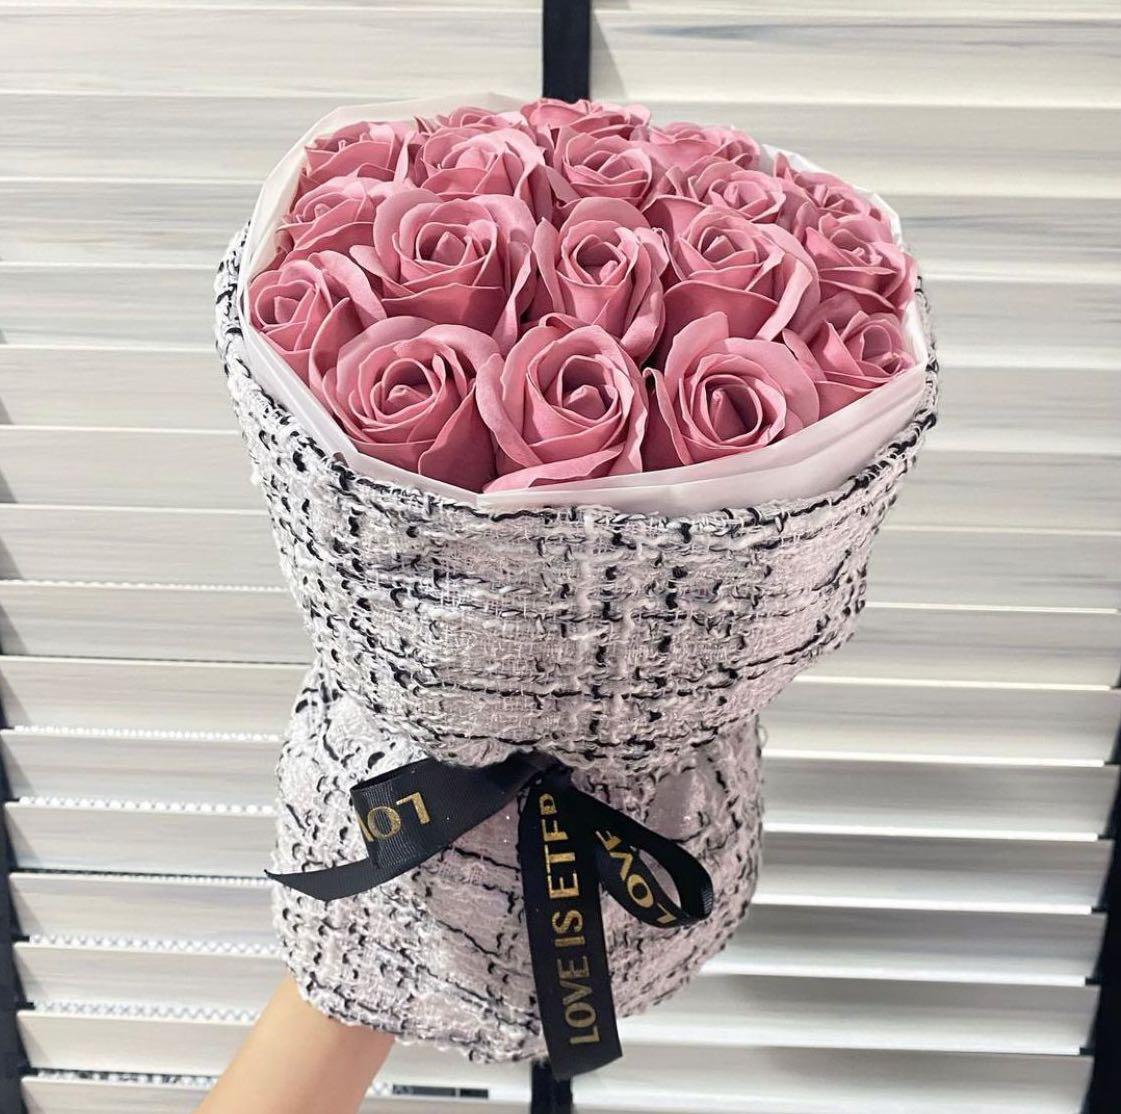 Chanel knitted wrapping in soap roses bouquet